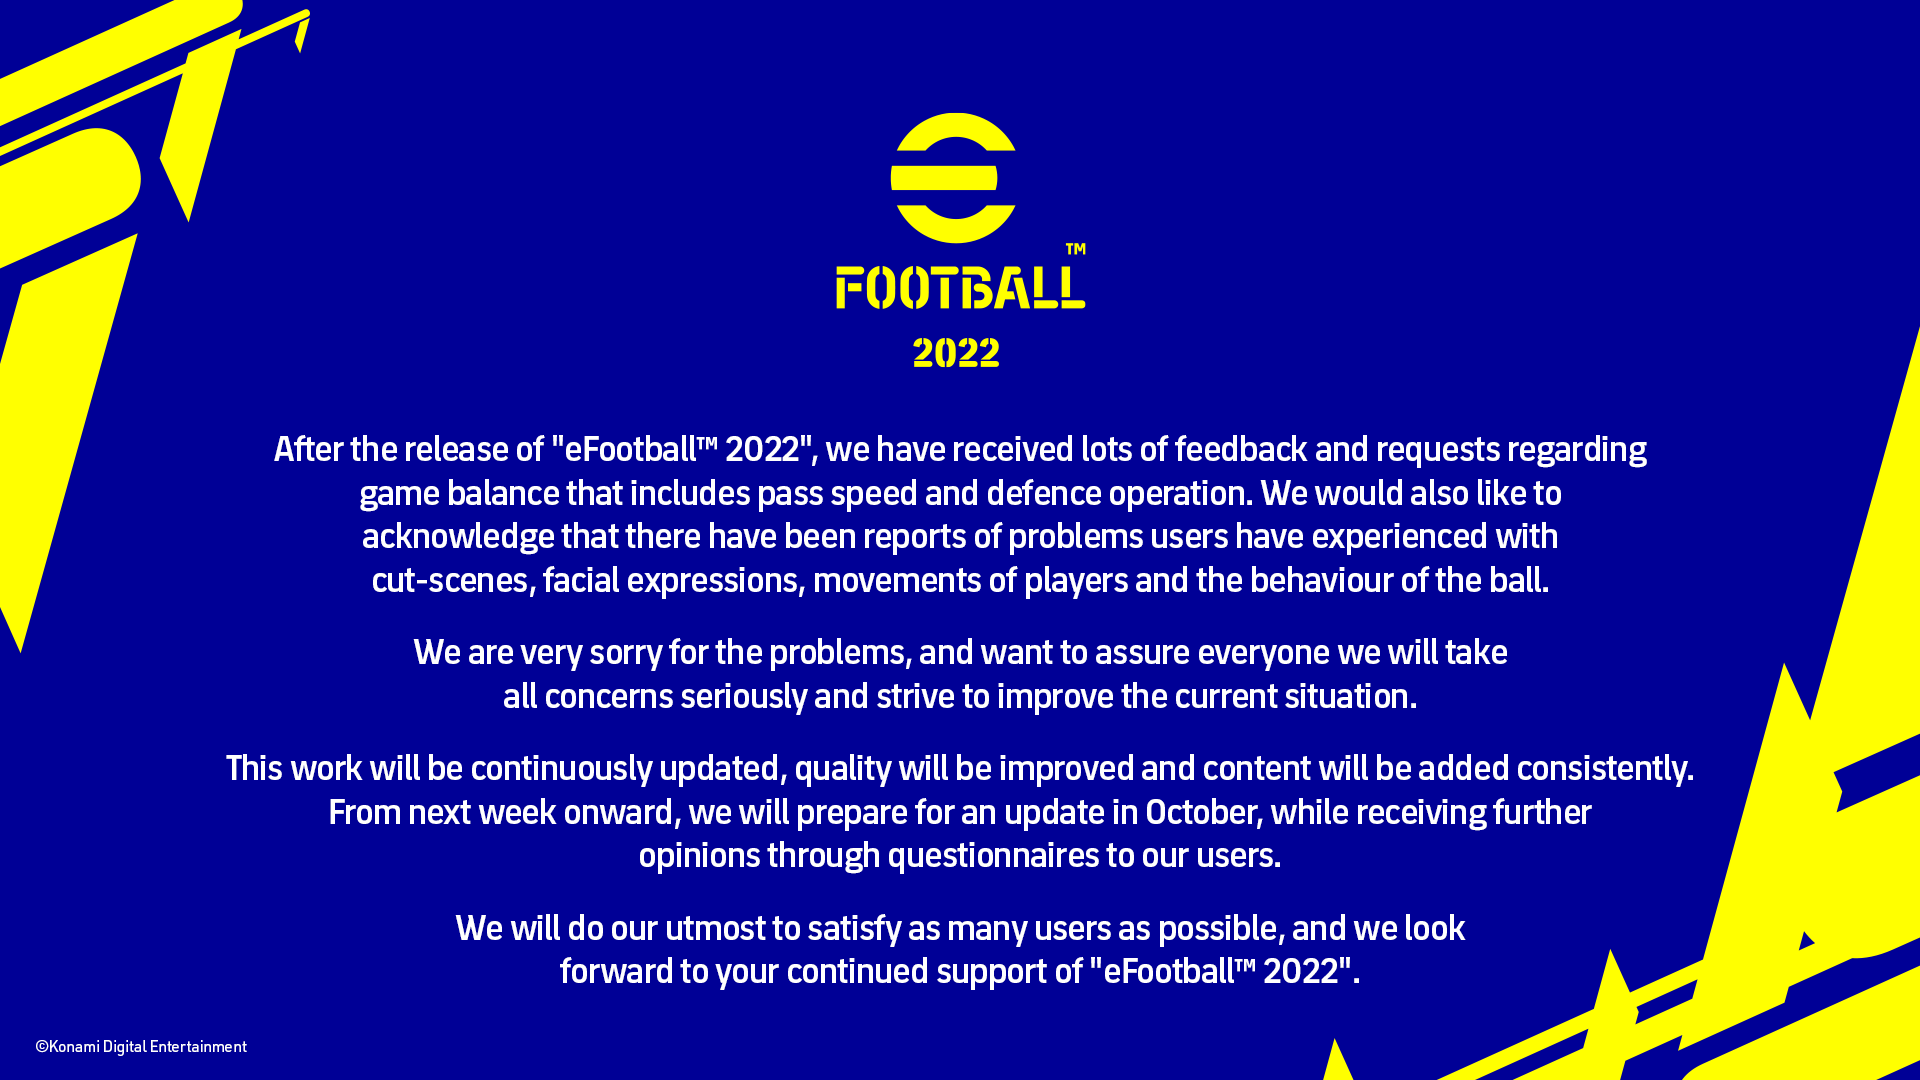 Konami falls at the first hurdle with eFootball 2022 release -   News